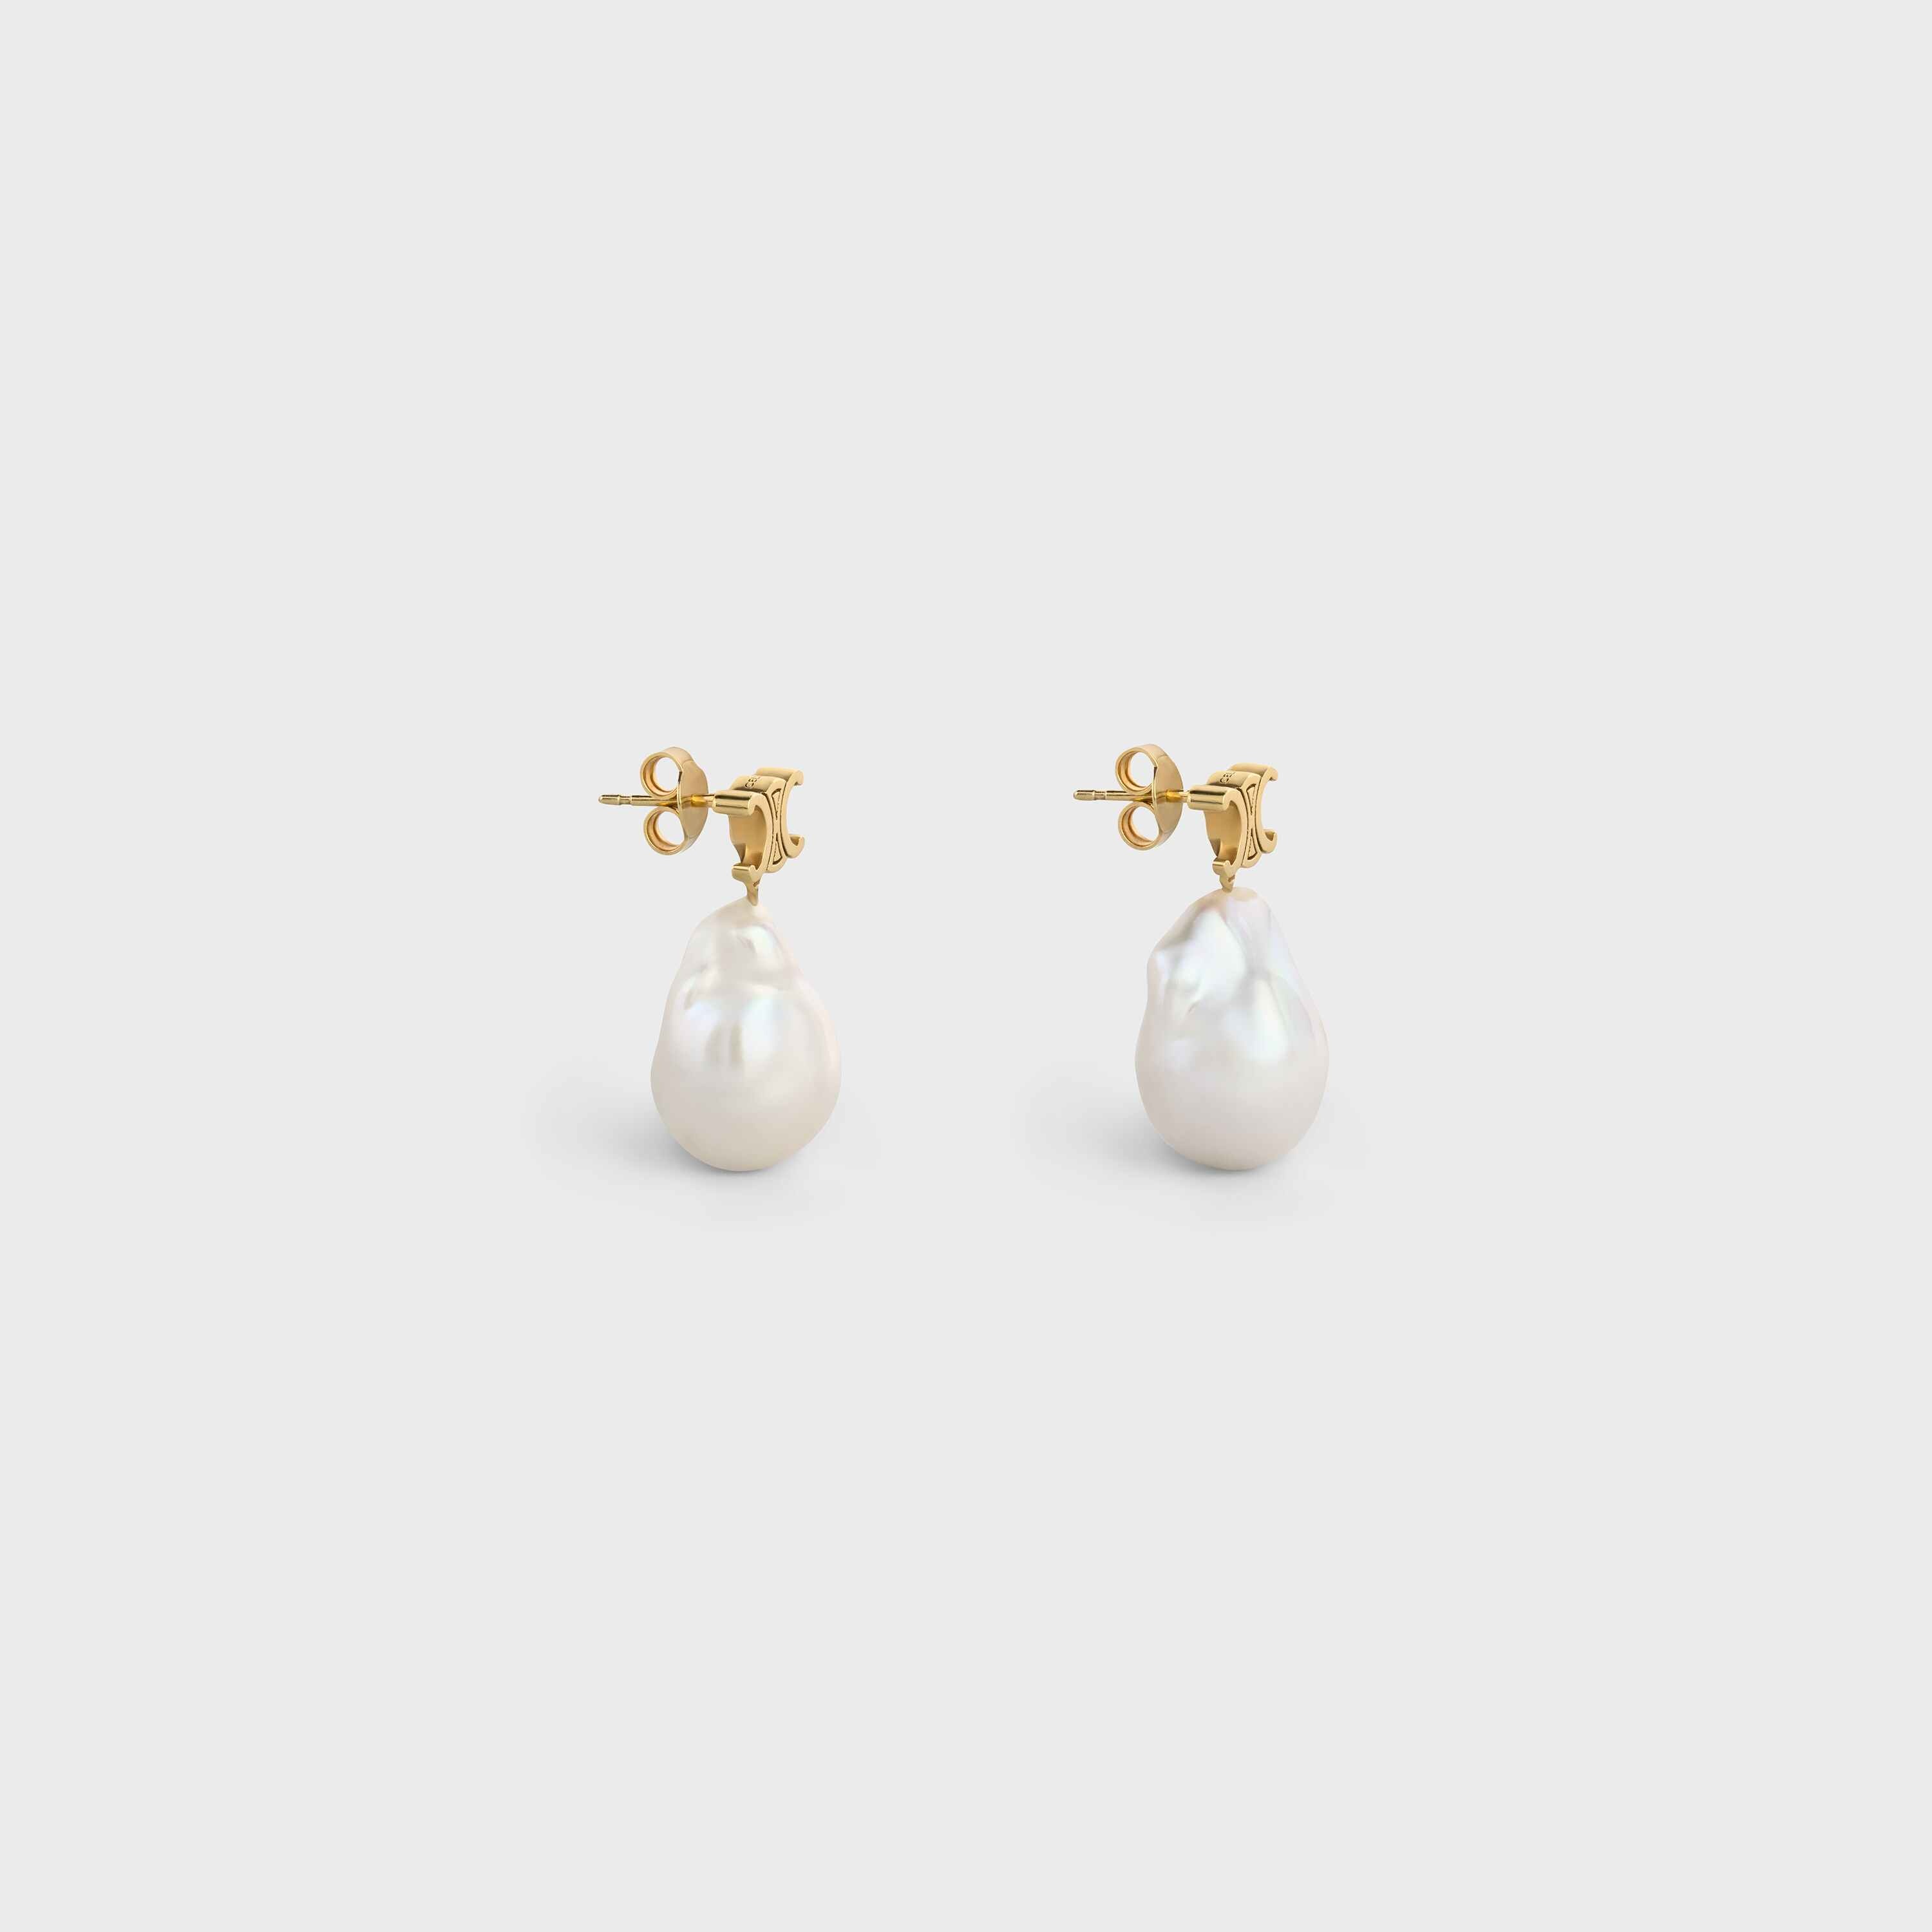 Baroque Triomphe Earrings in Brass with Gold Finish and Cultured Pearls - 2